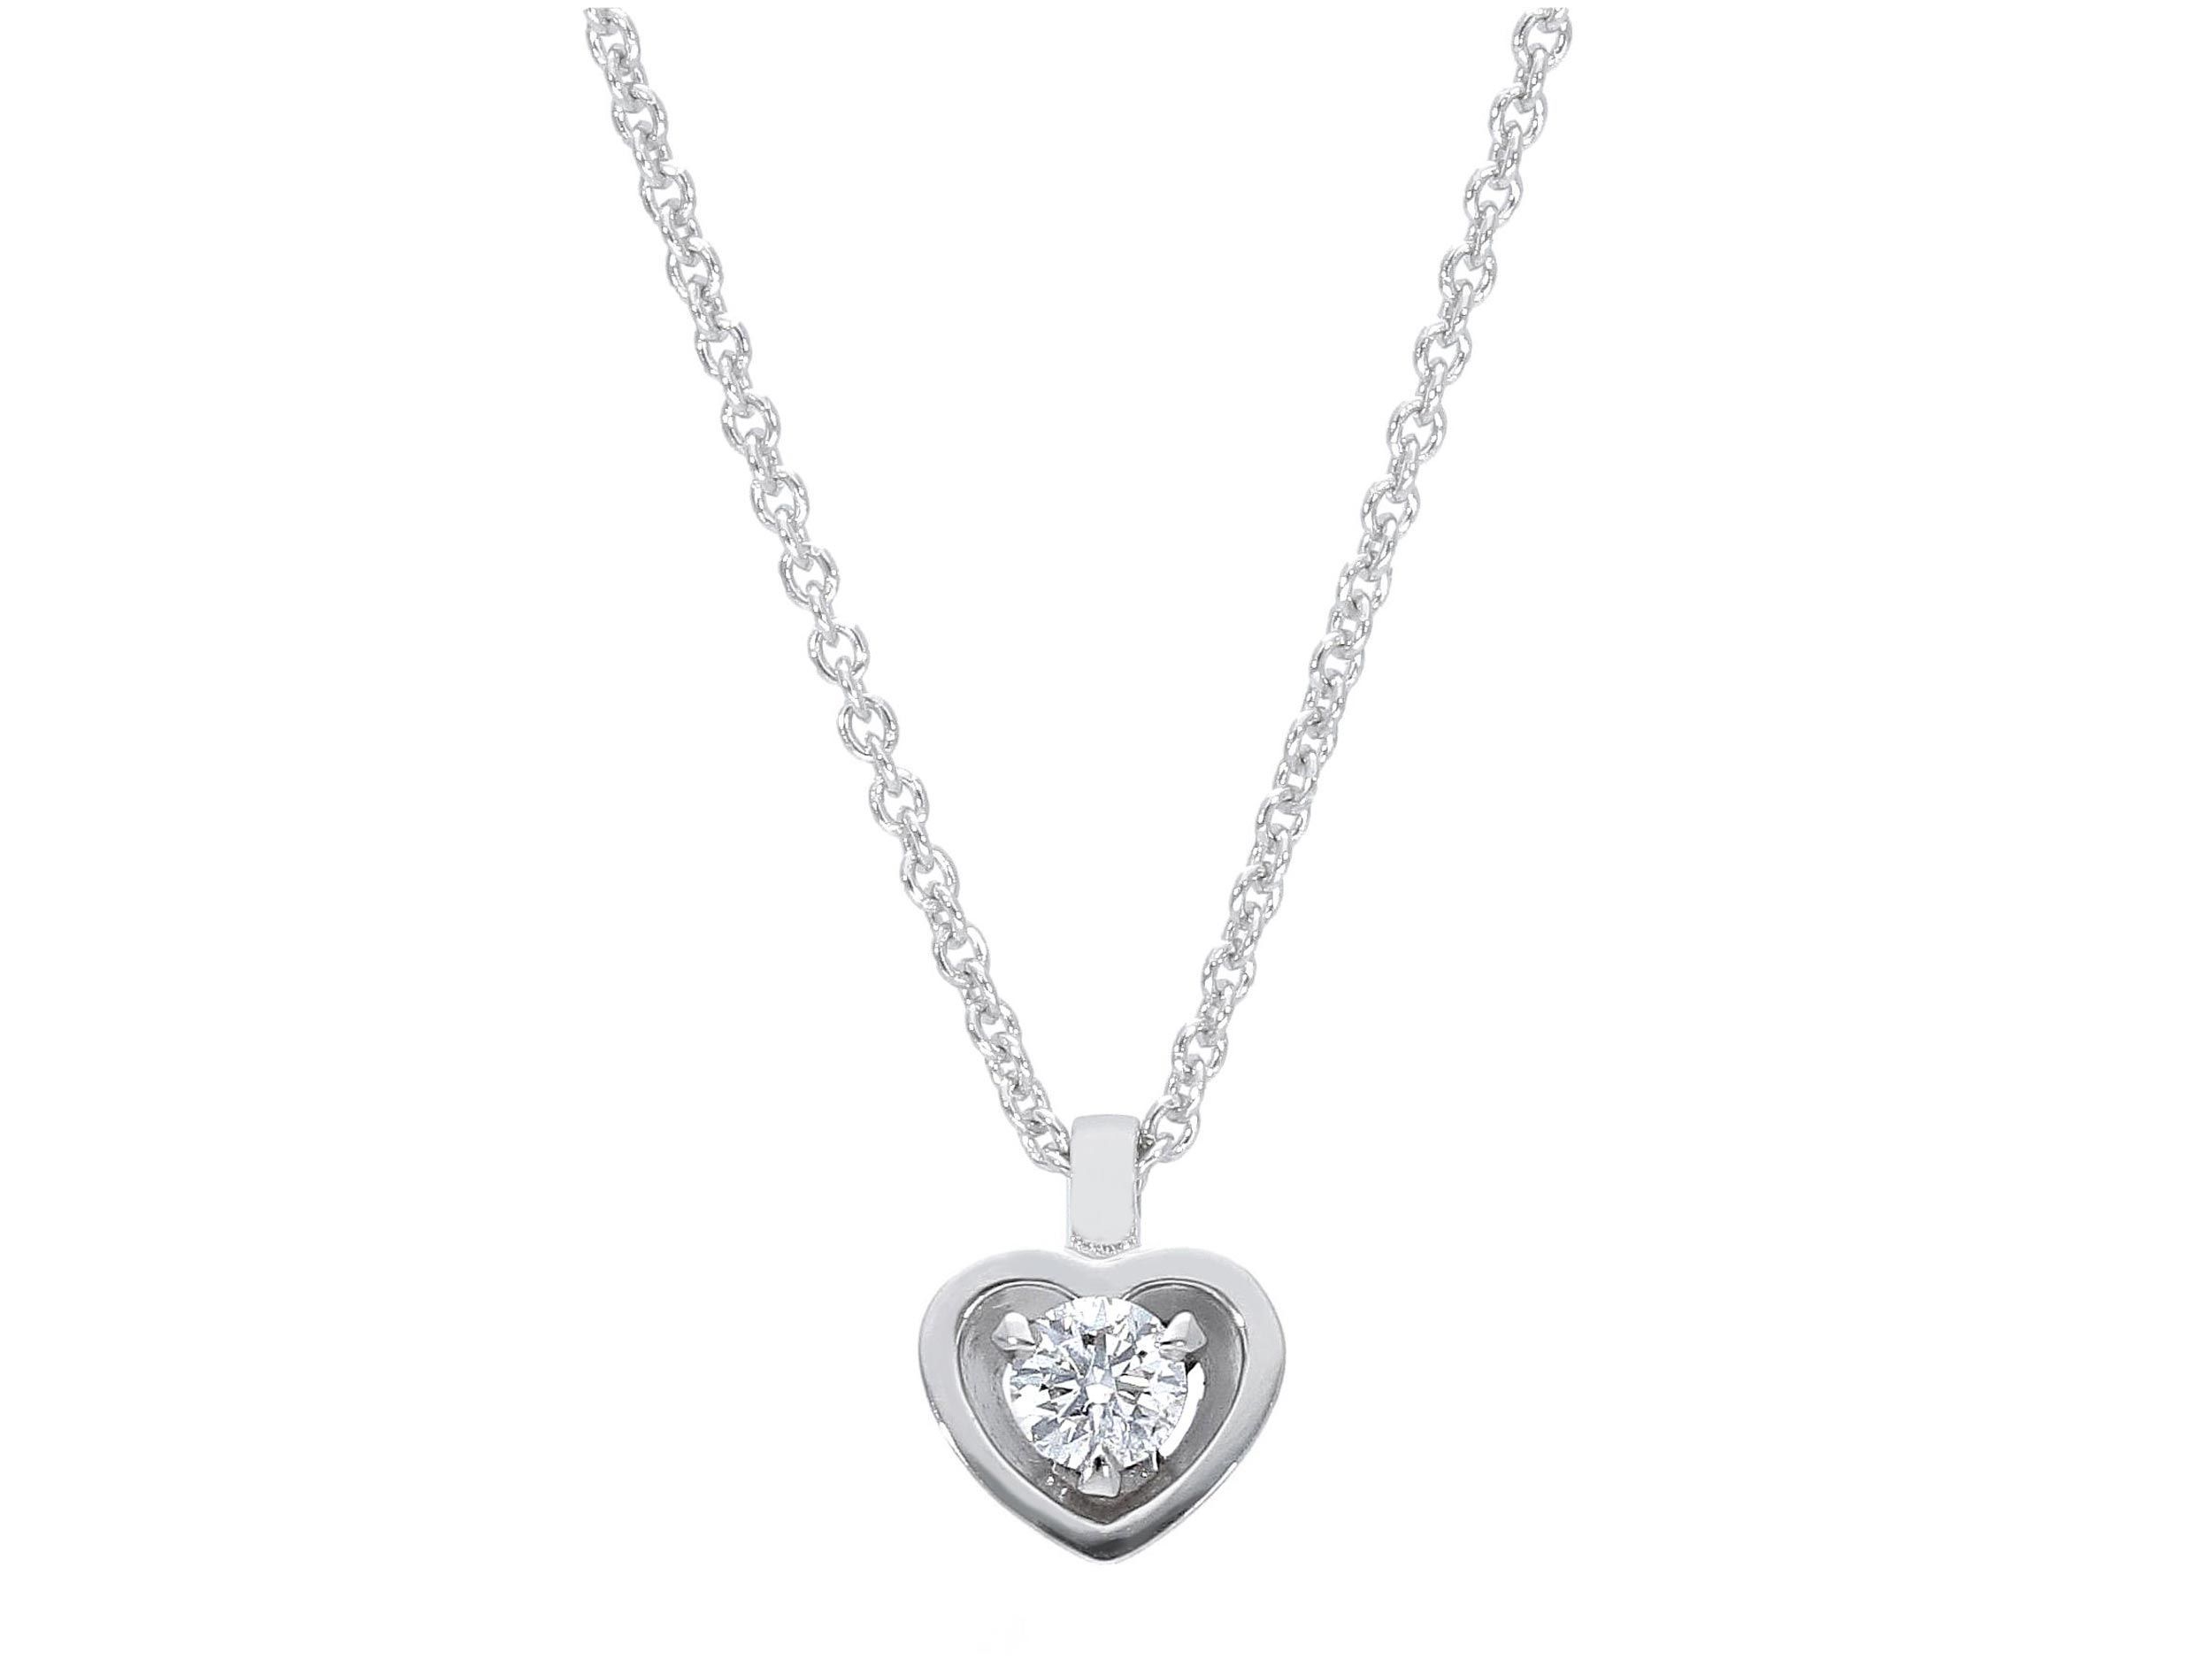 White gold single stone necklace k18 with diamond (code S217560)